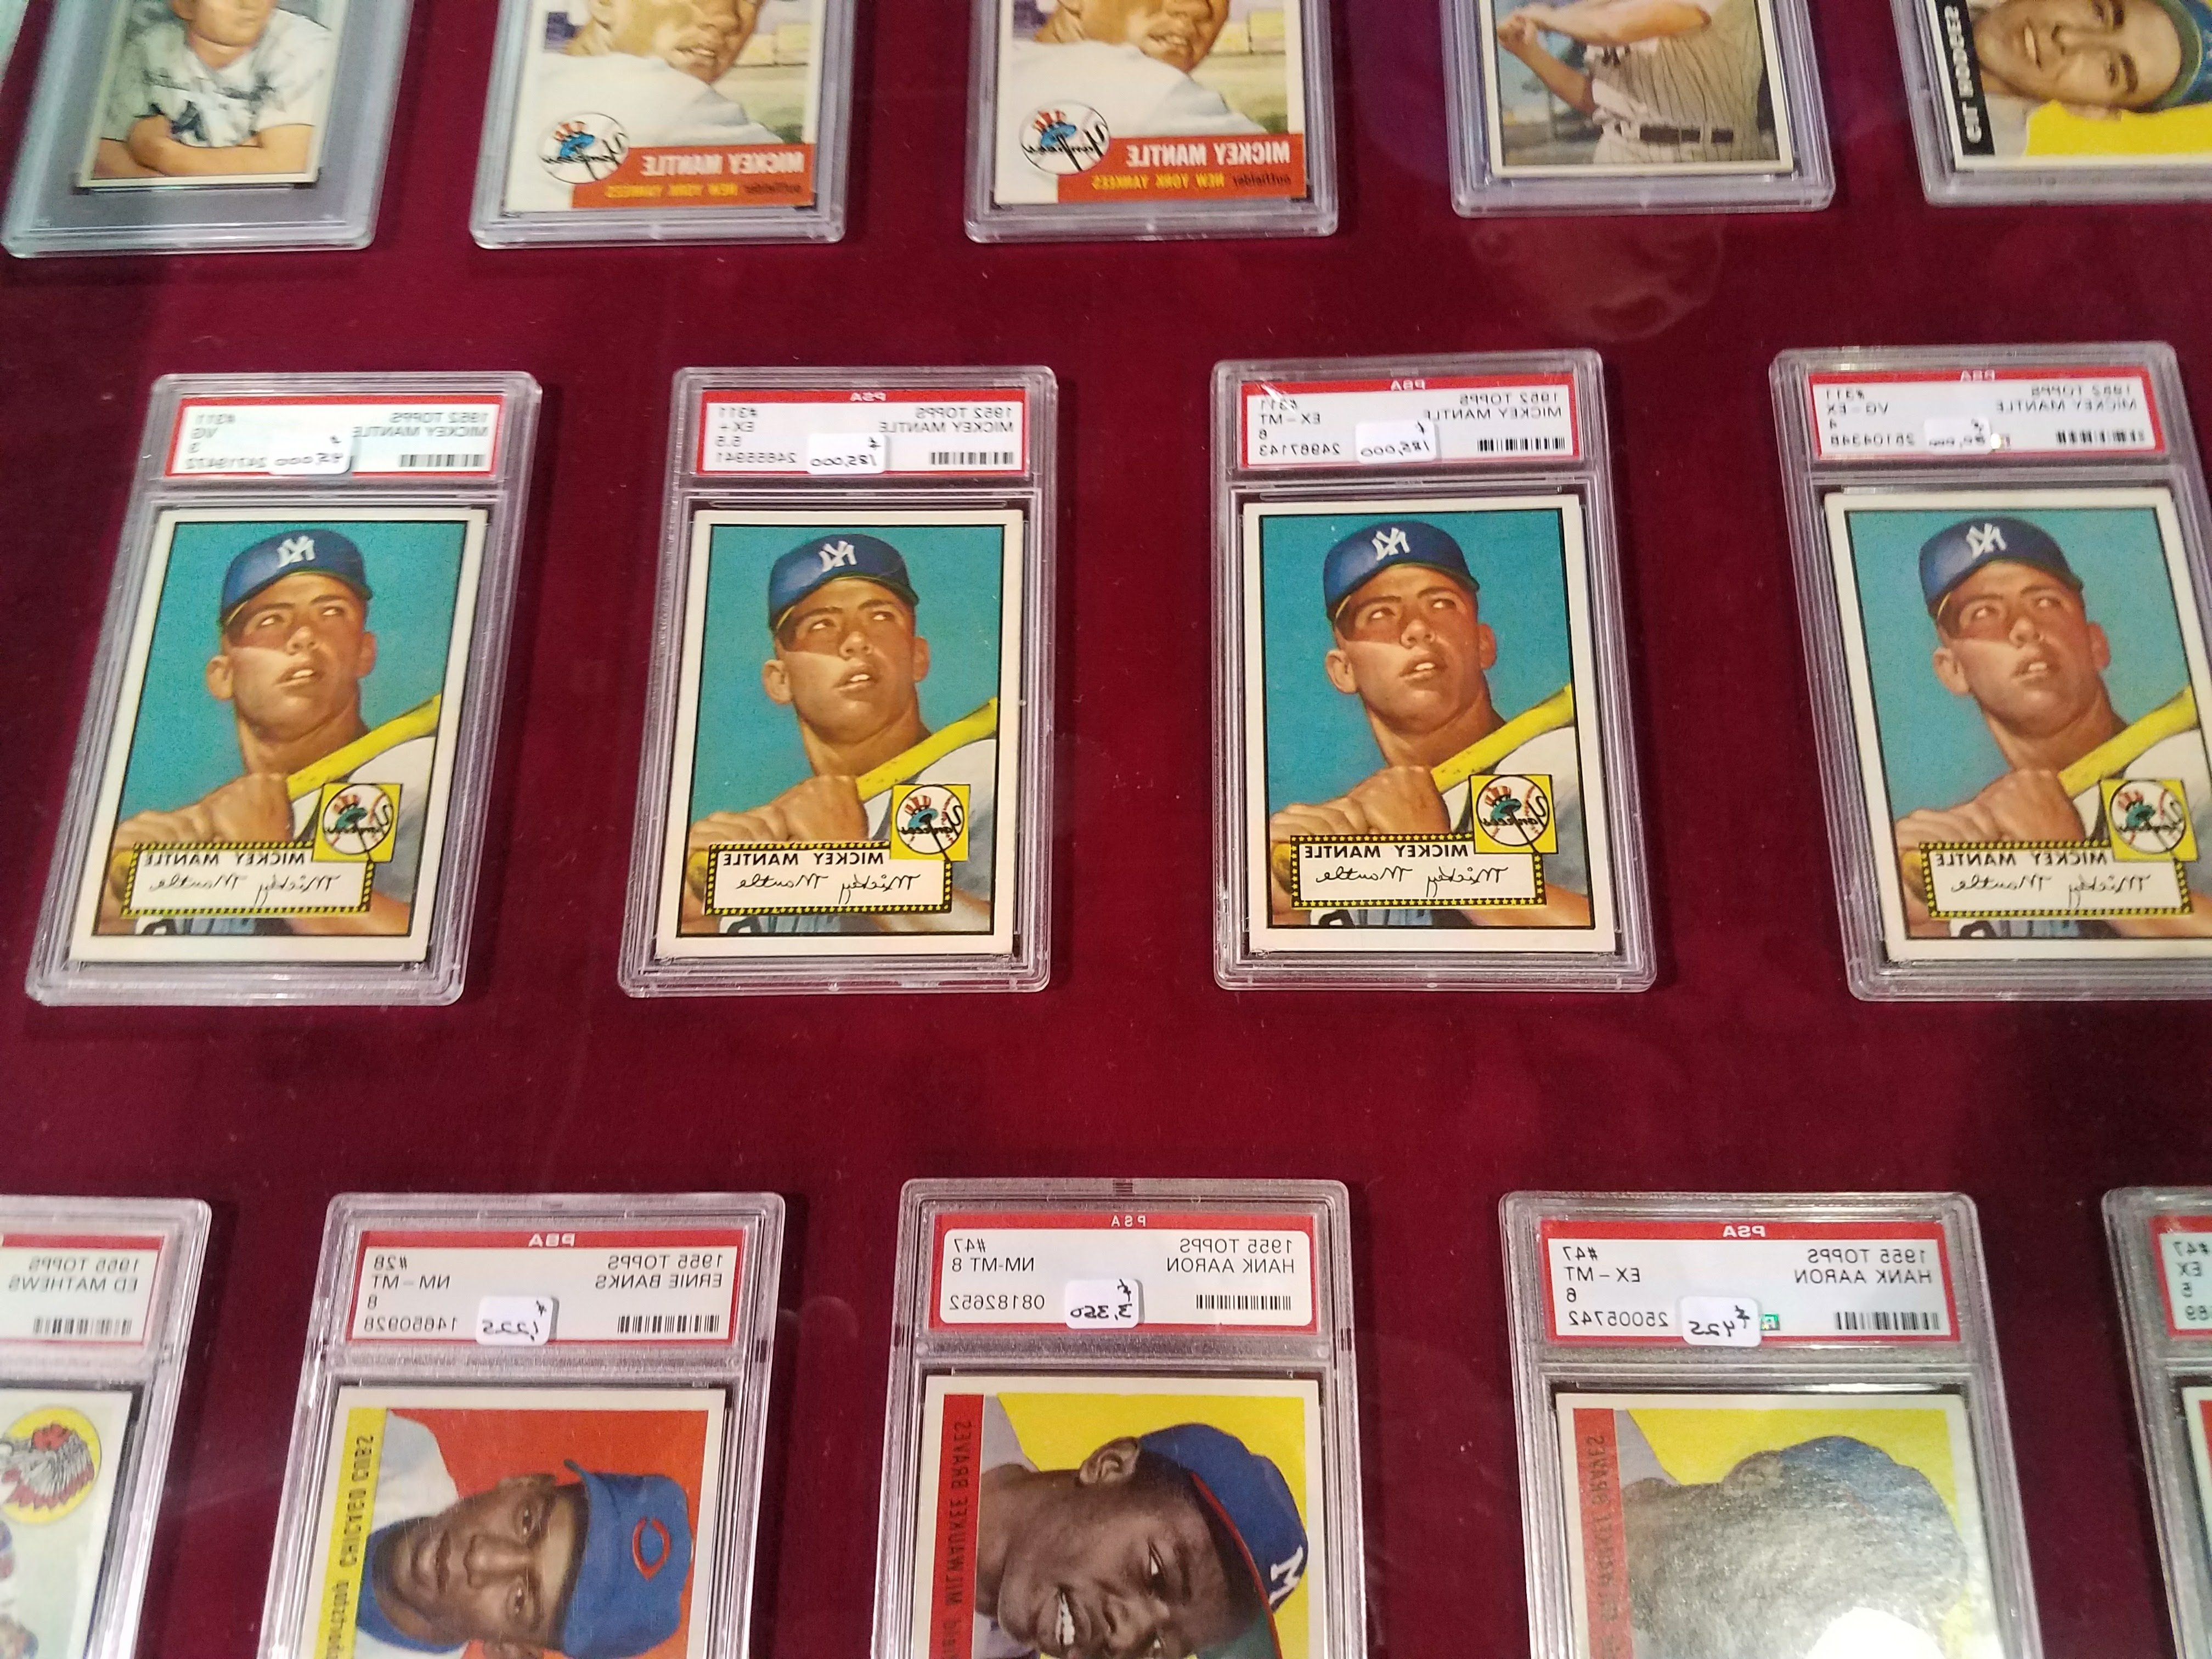 A collection of Vintage Baseball Cards